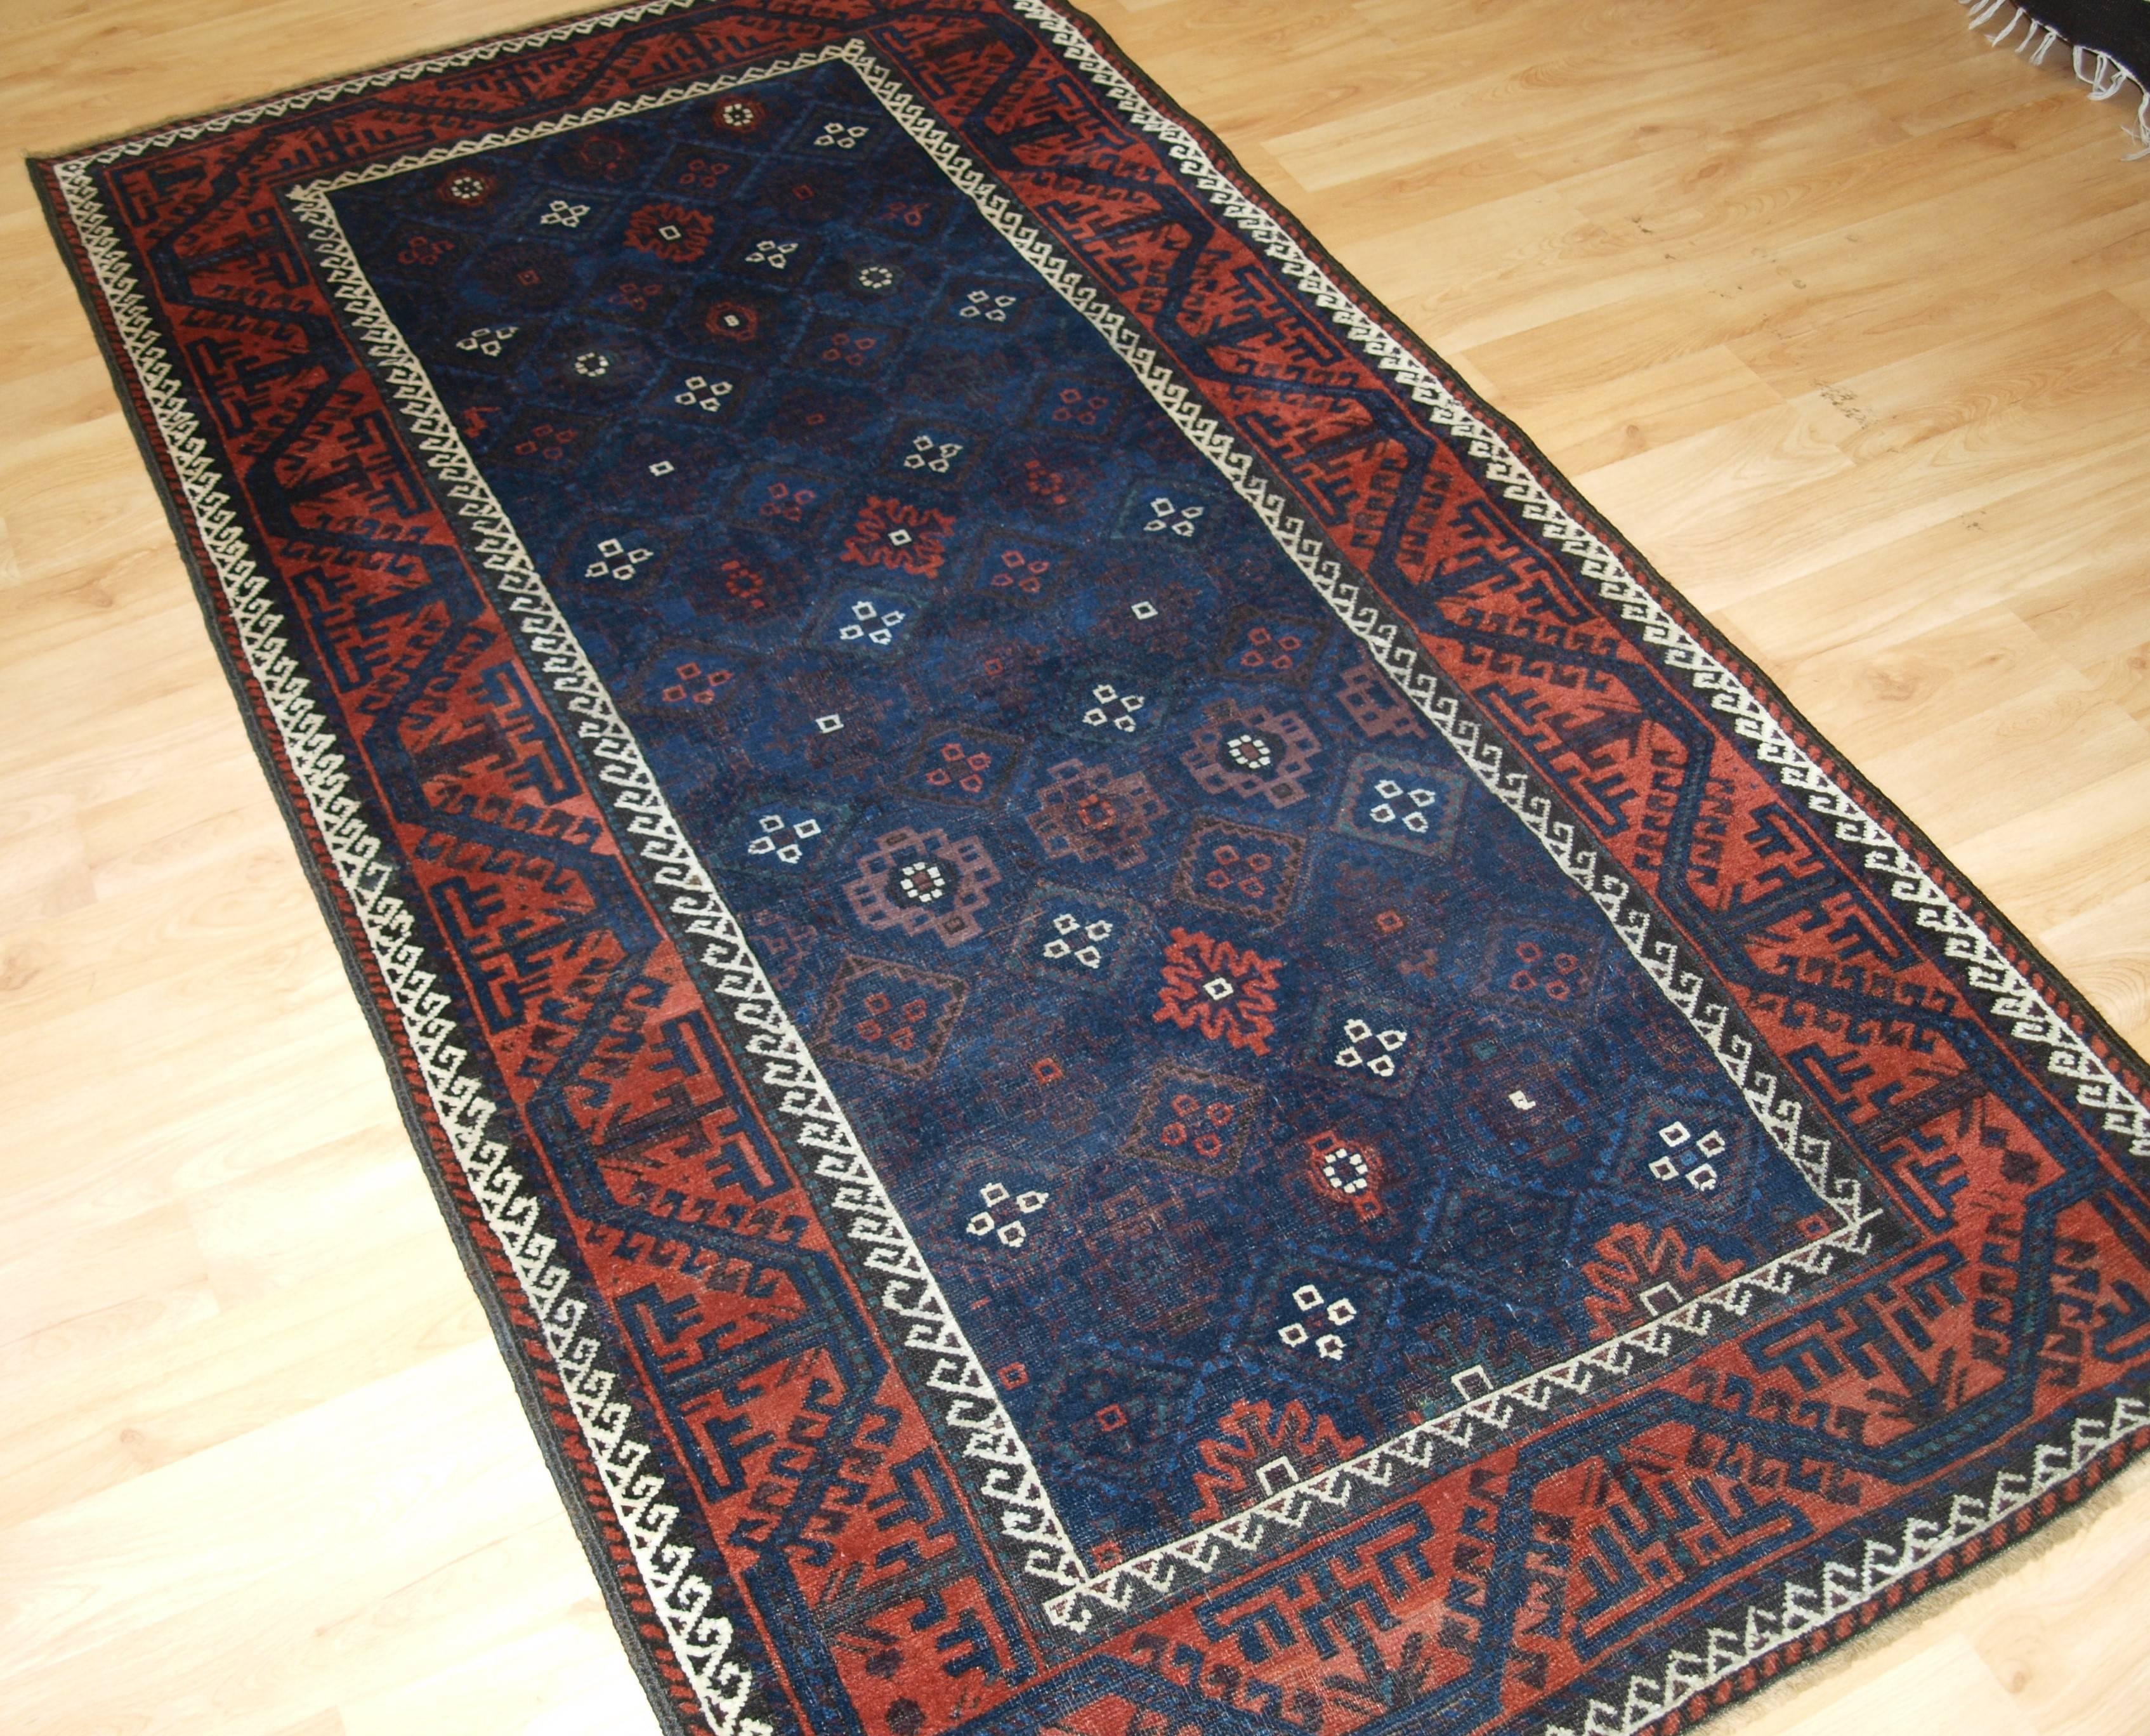 Size: 6ft 11in x 3ft 8in (212 x 112cm).
Antique Baluch rug from Western Afghanistan / Eastern Persia. A Baluch rug with a very unusual lattice design in blue.
circa 1880.
A superb Baluch rug with a diamond lattice design with mina khani type